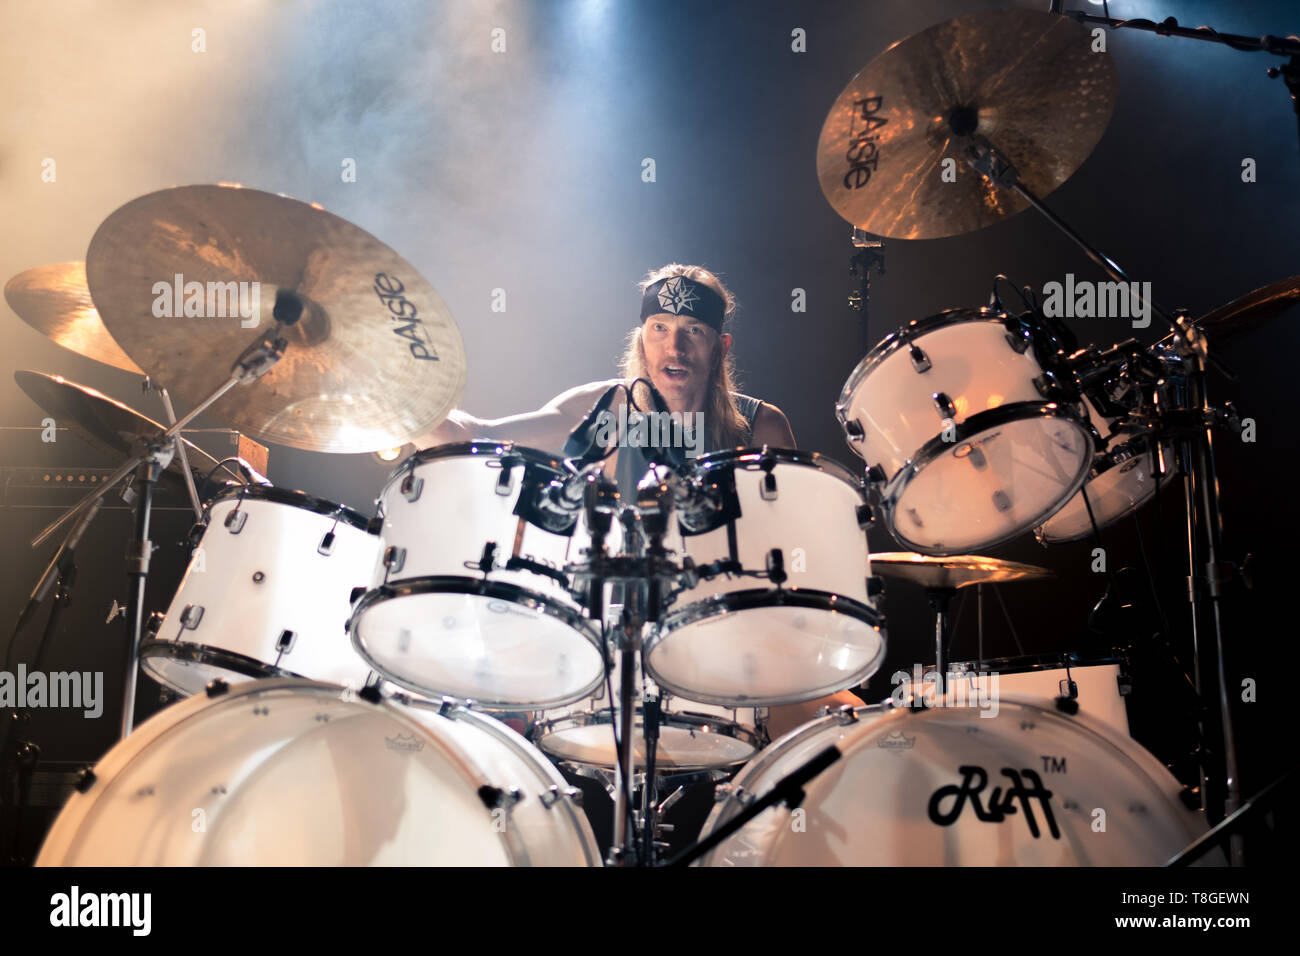 Norway, Stavanger - October 6, 2017. The Norwegian blues rock band Spidergawd performs a live concert at Venue in Stavanger. Here drummer Kenneth Kapstad is seen live on stage. (Photo credit: Gonzales Photo - Christer Haavarstein). Stock Photo